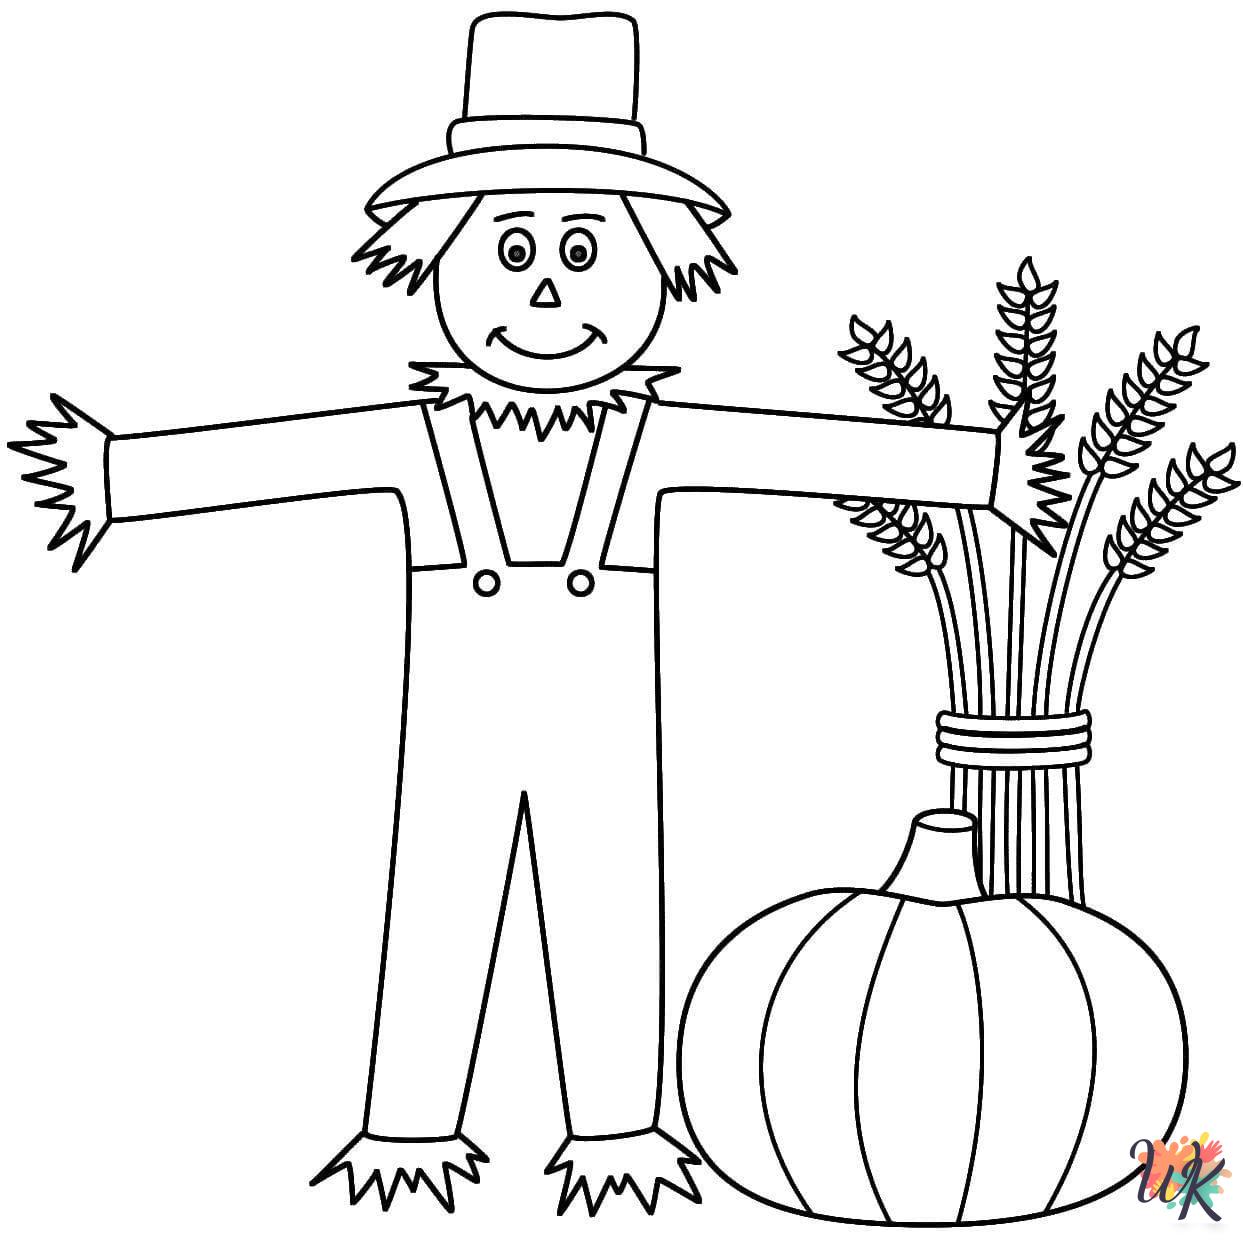 merry Scarecrow coloring pages